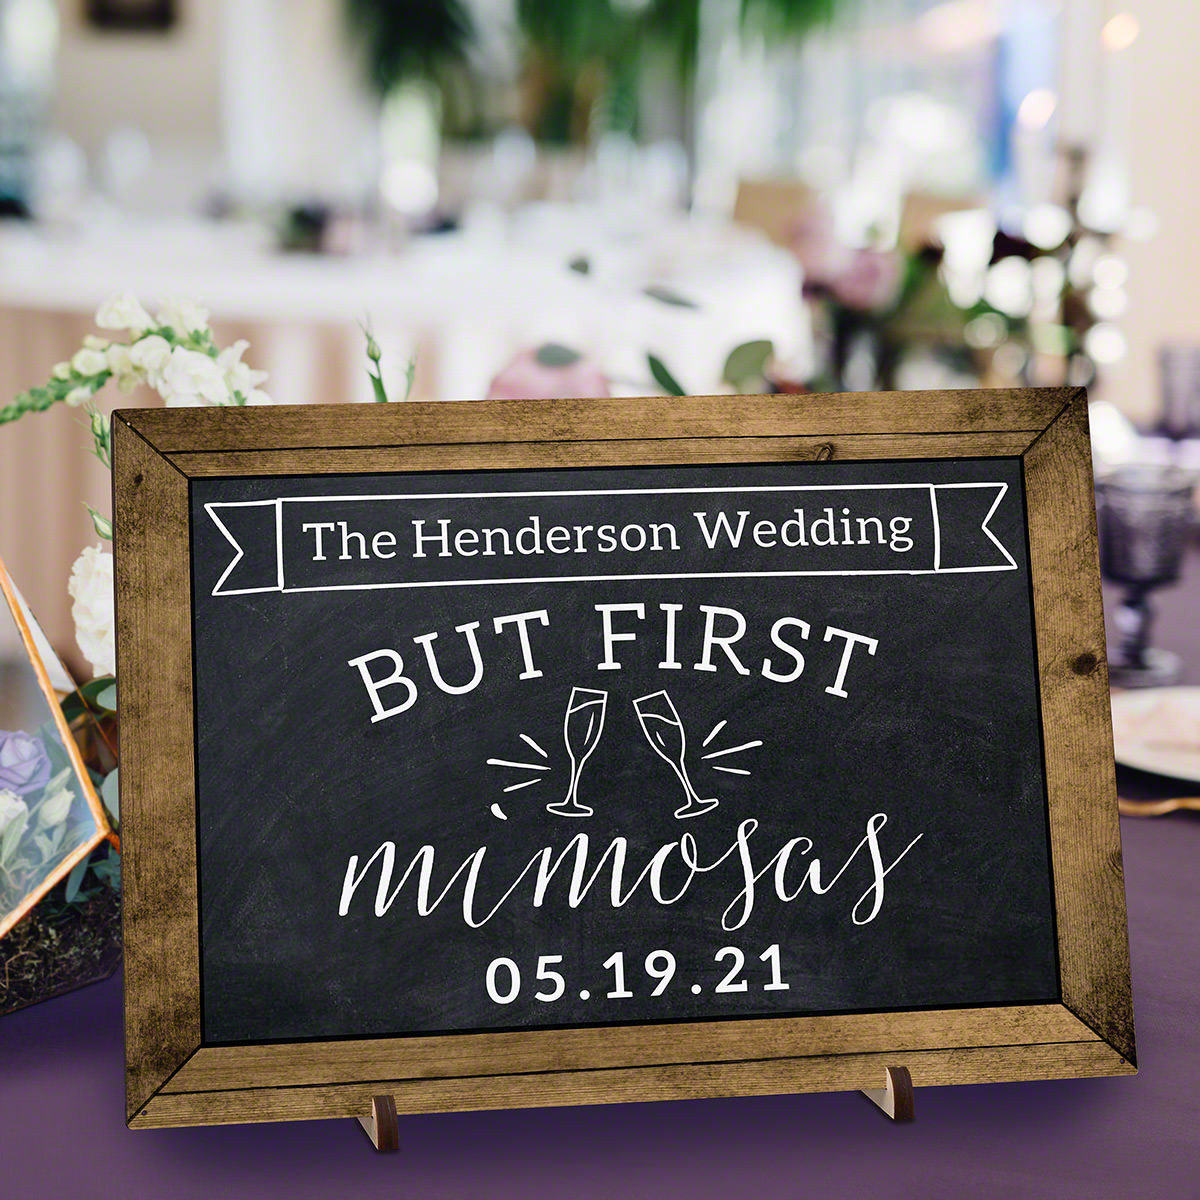 Champagne is traditionally served at weddings, but mimosas are becoming more popular. Our cute chalkboard-inspired custom mimosa bar sign is the perfect piece of decor for your wedding reception! Your guests will love being greeted by this adorable sign w #bar